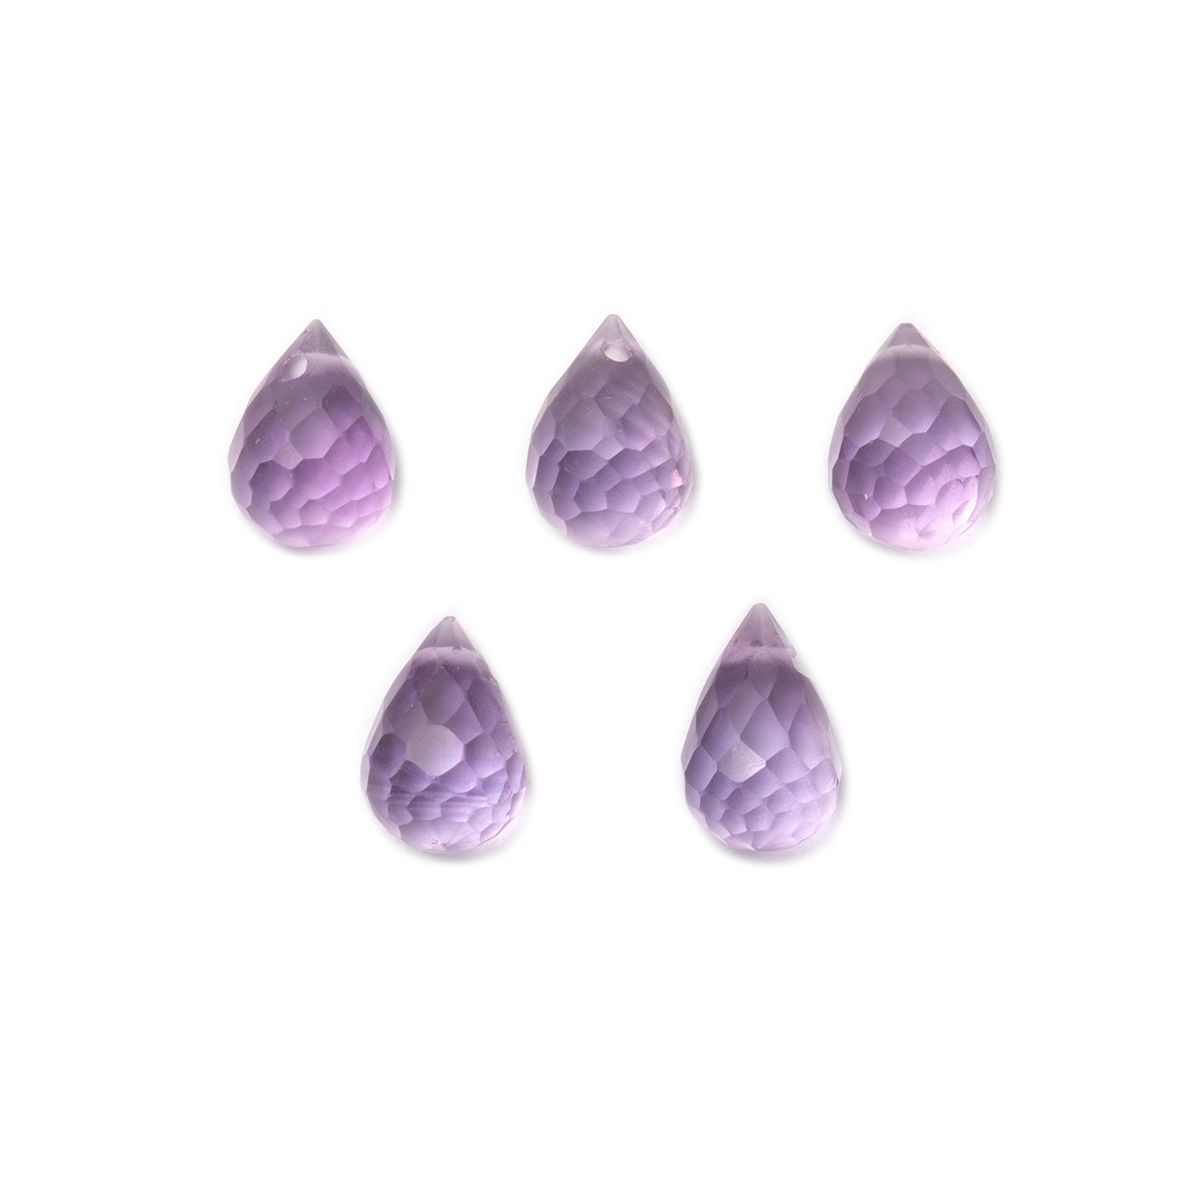 Pink Amethyst Faceted Drop Briolette Beads - Approx From 6mm, Pack Of 10 Beads